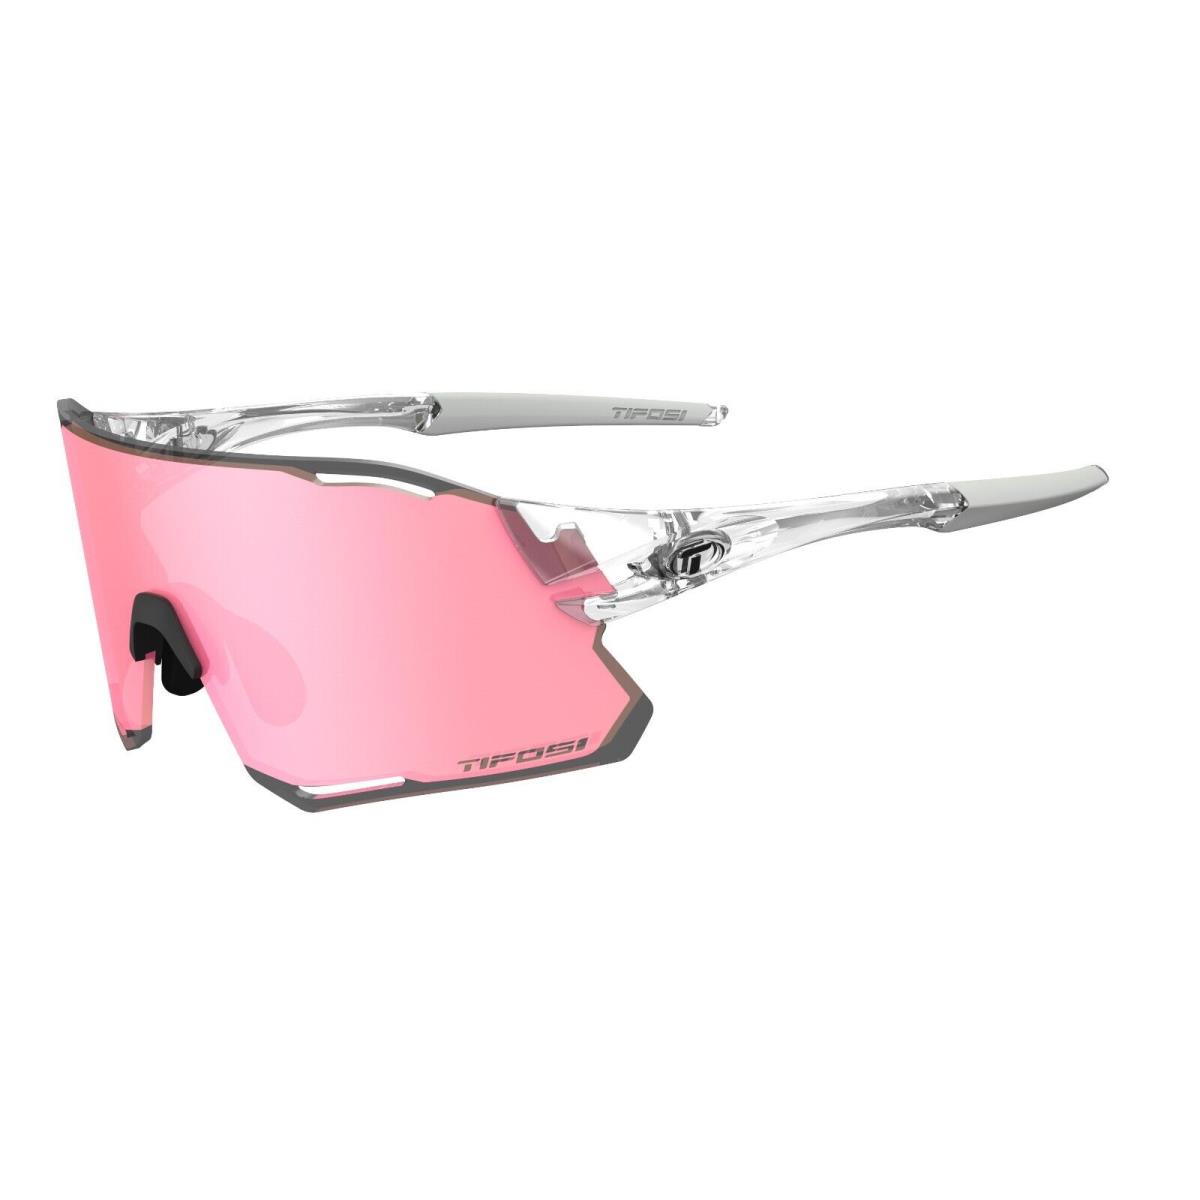 Tifosi Rail Race White Clear Satin Vapor Sunglasses Choose Your Style Crystal Clear Clarion Rose